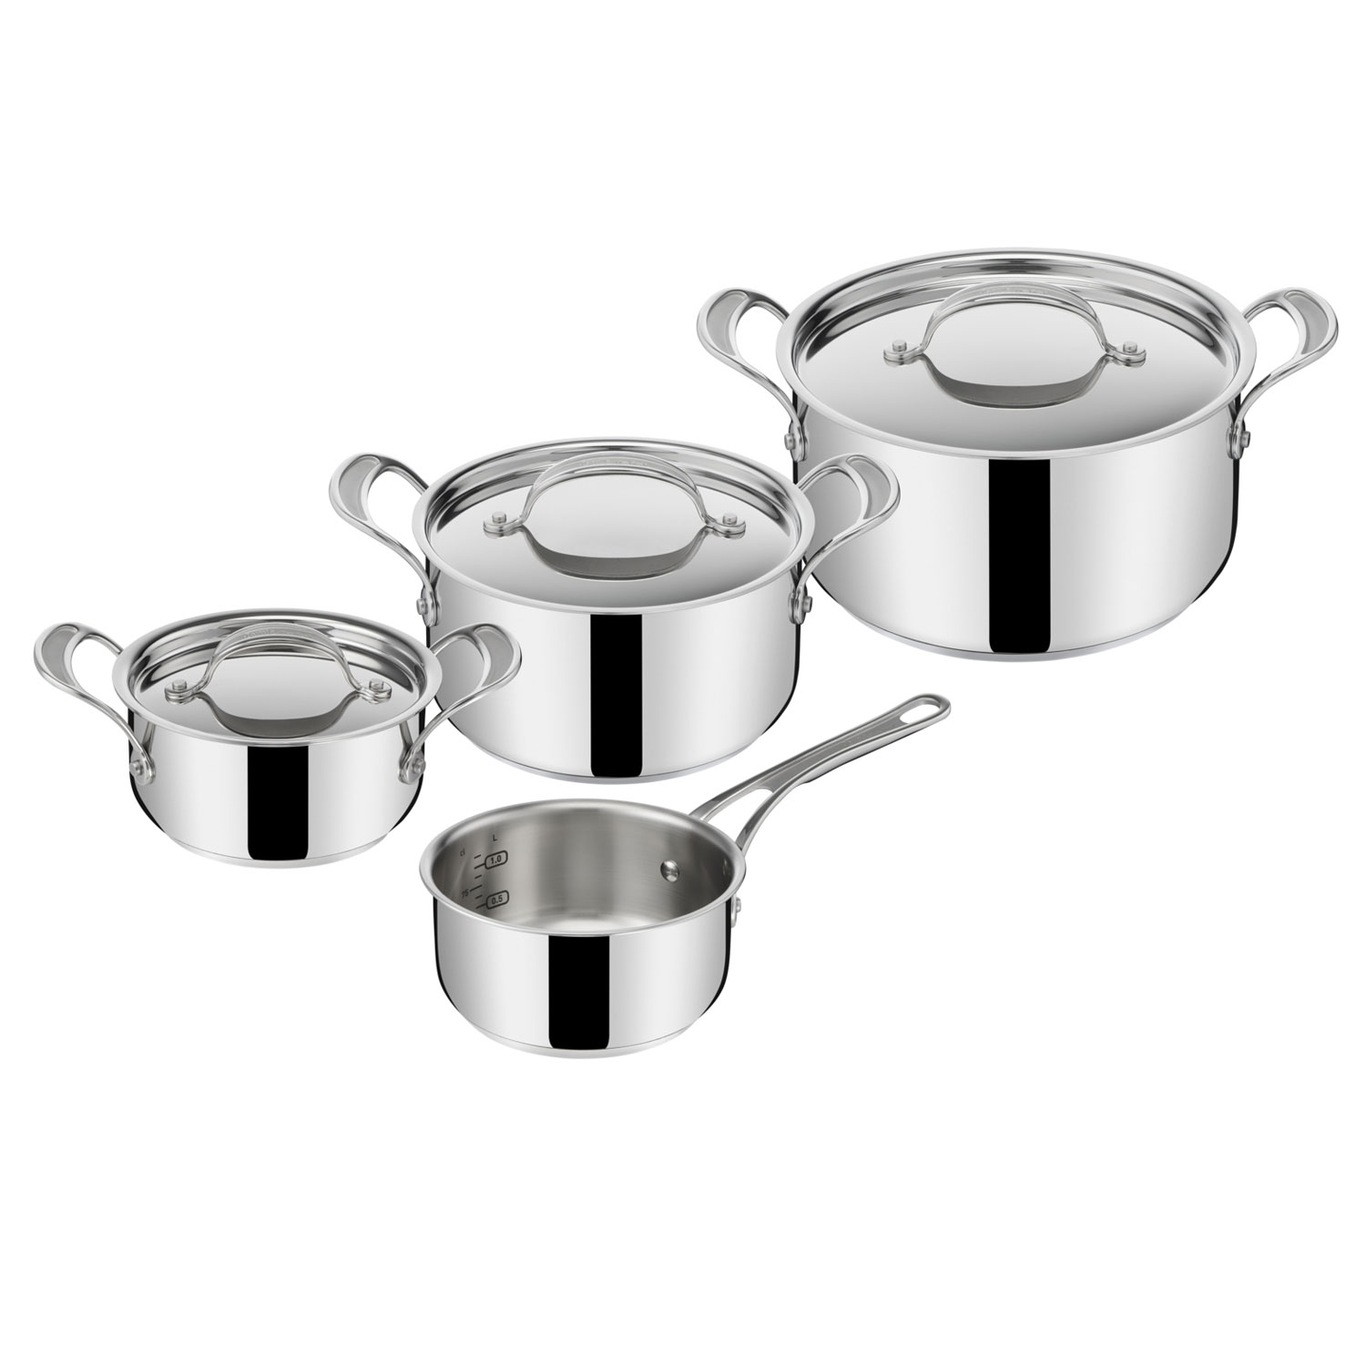 Jamie Oliver Cook's Classic Pot Set Stainless Steel 7 Pieces